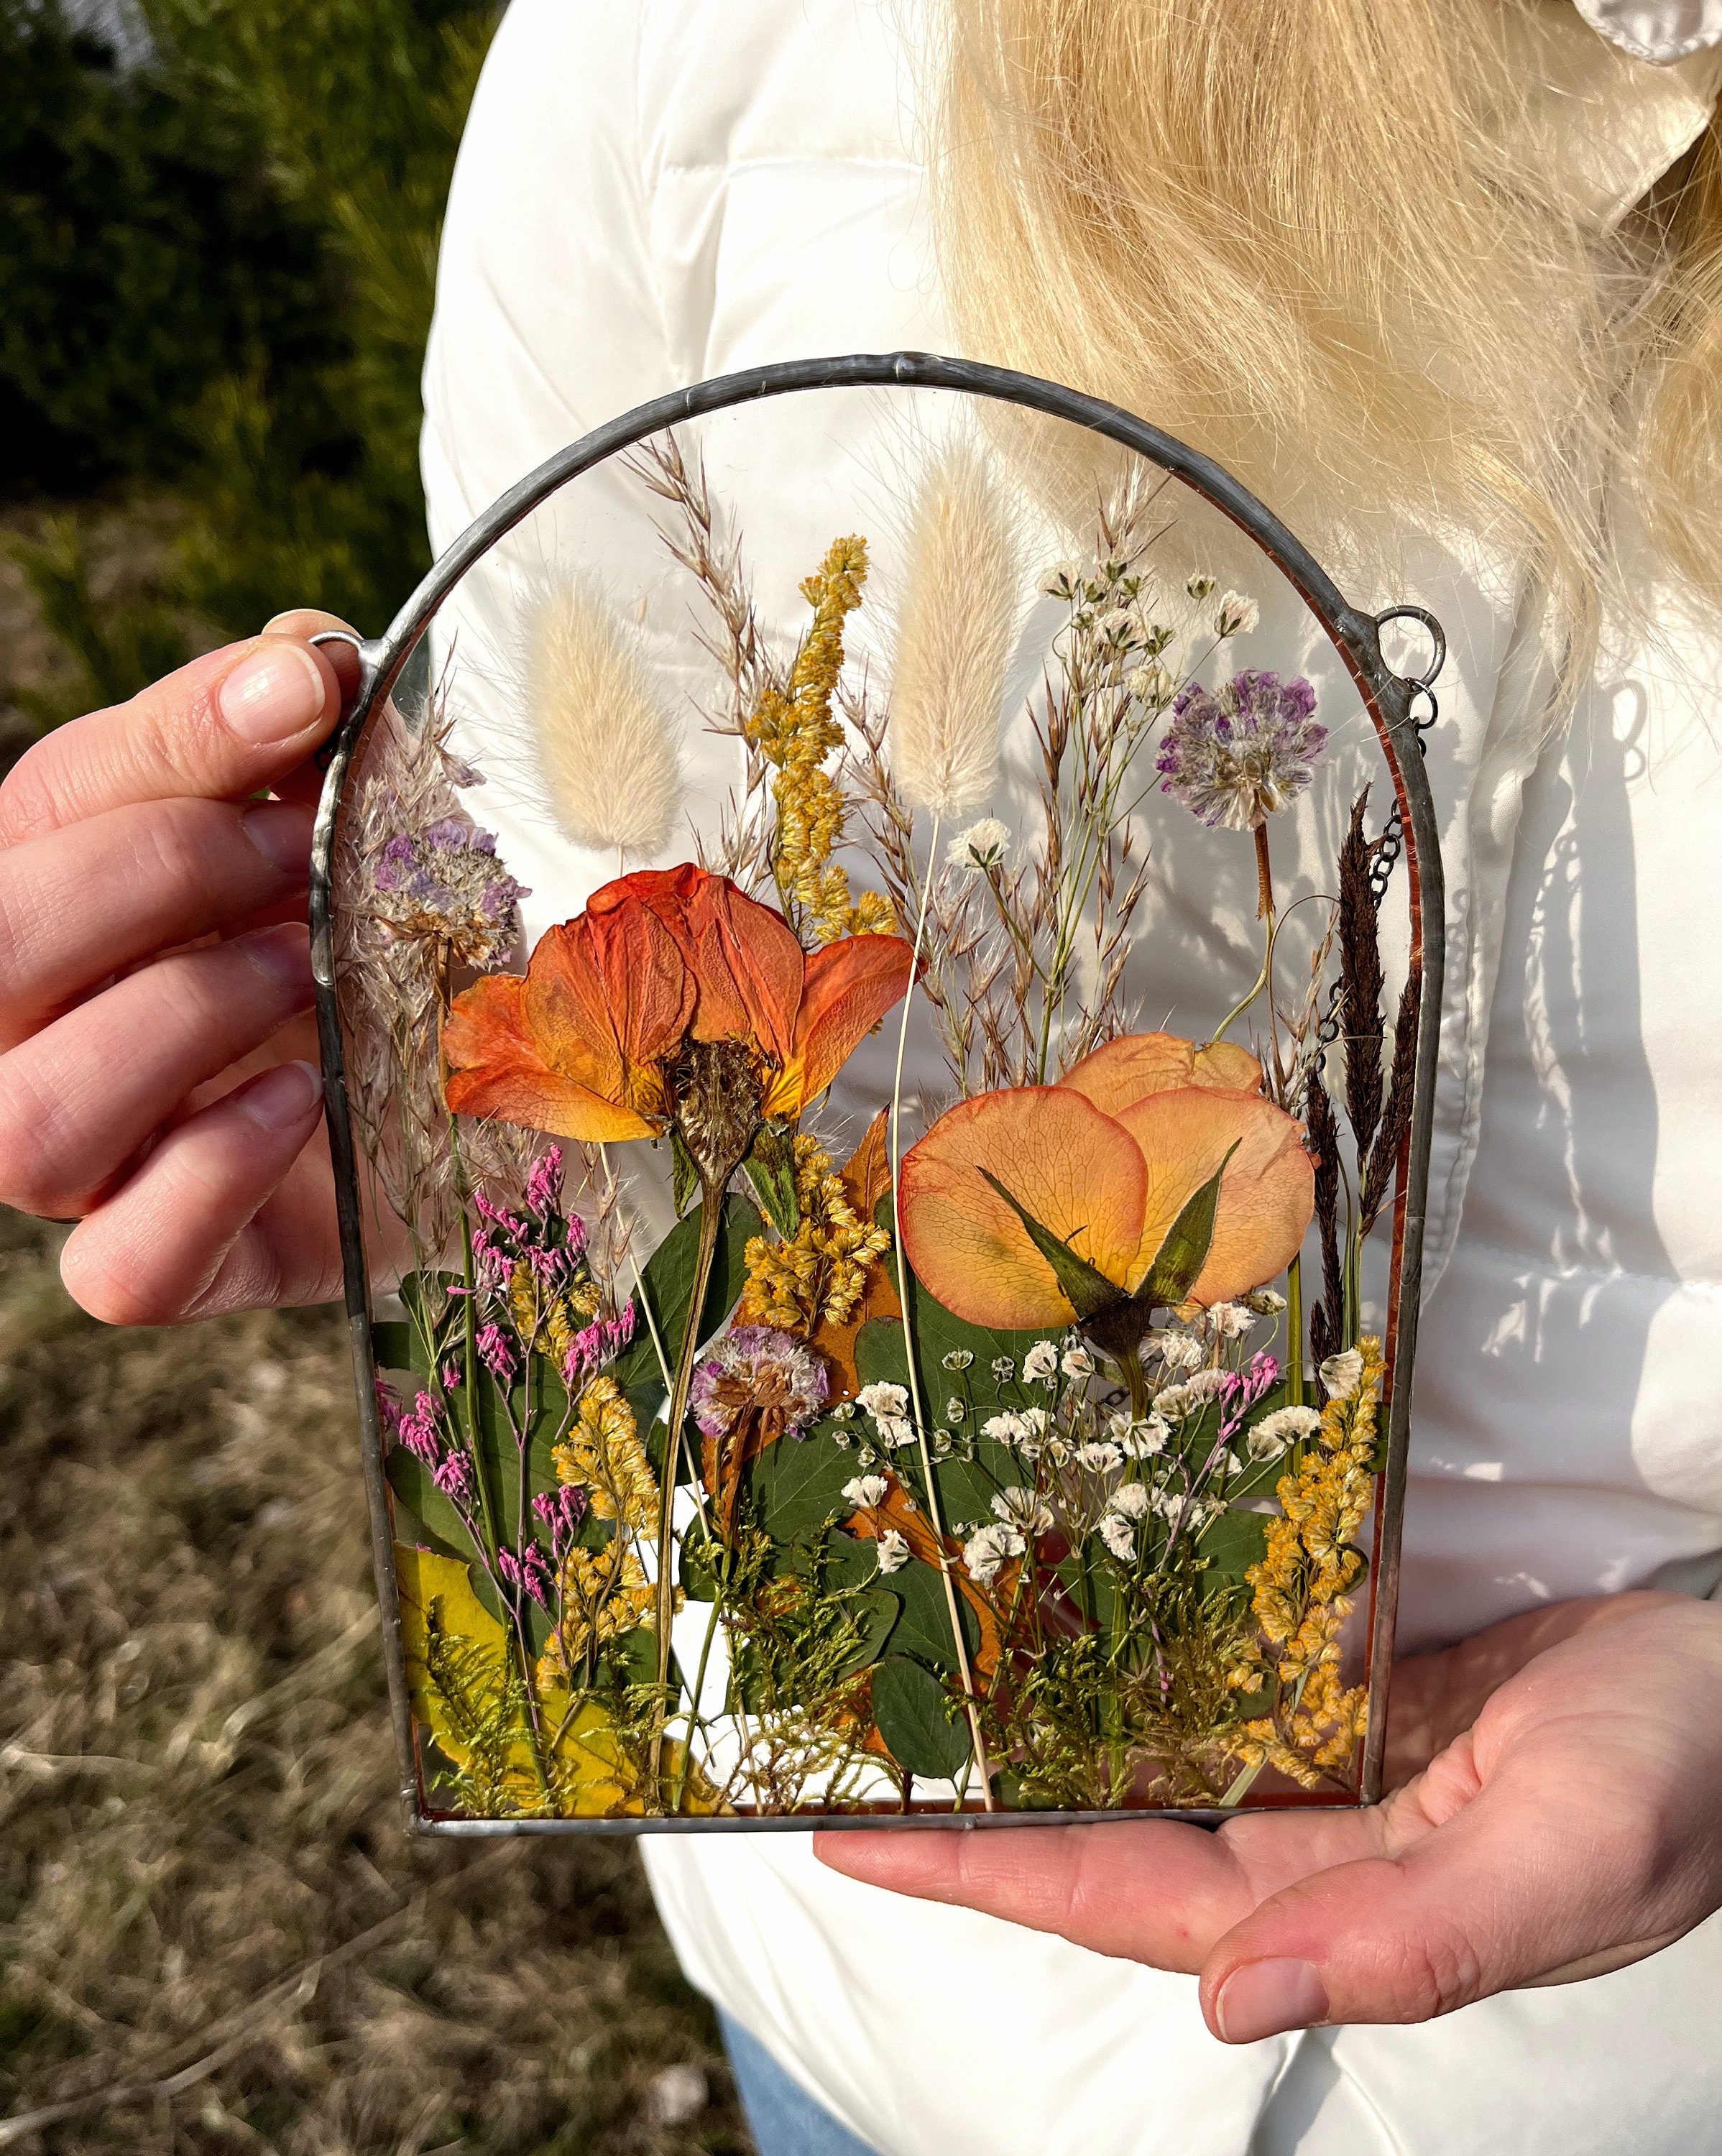 Art Glass  All frame sizes for maximum clarity – Pressed Floral